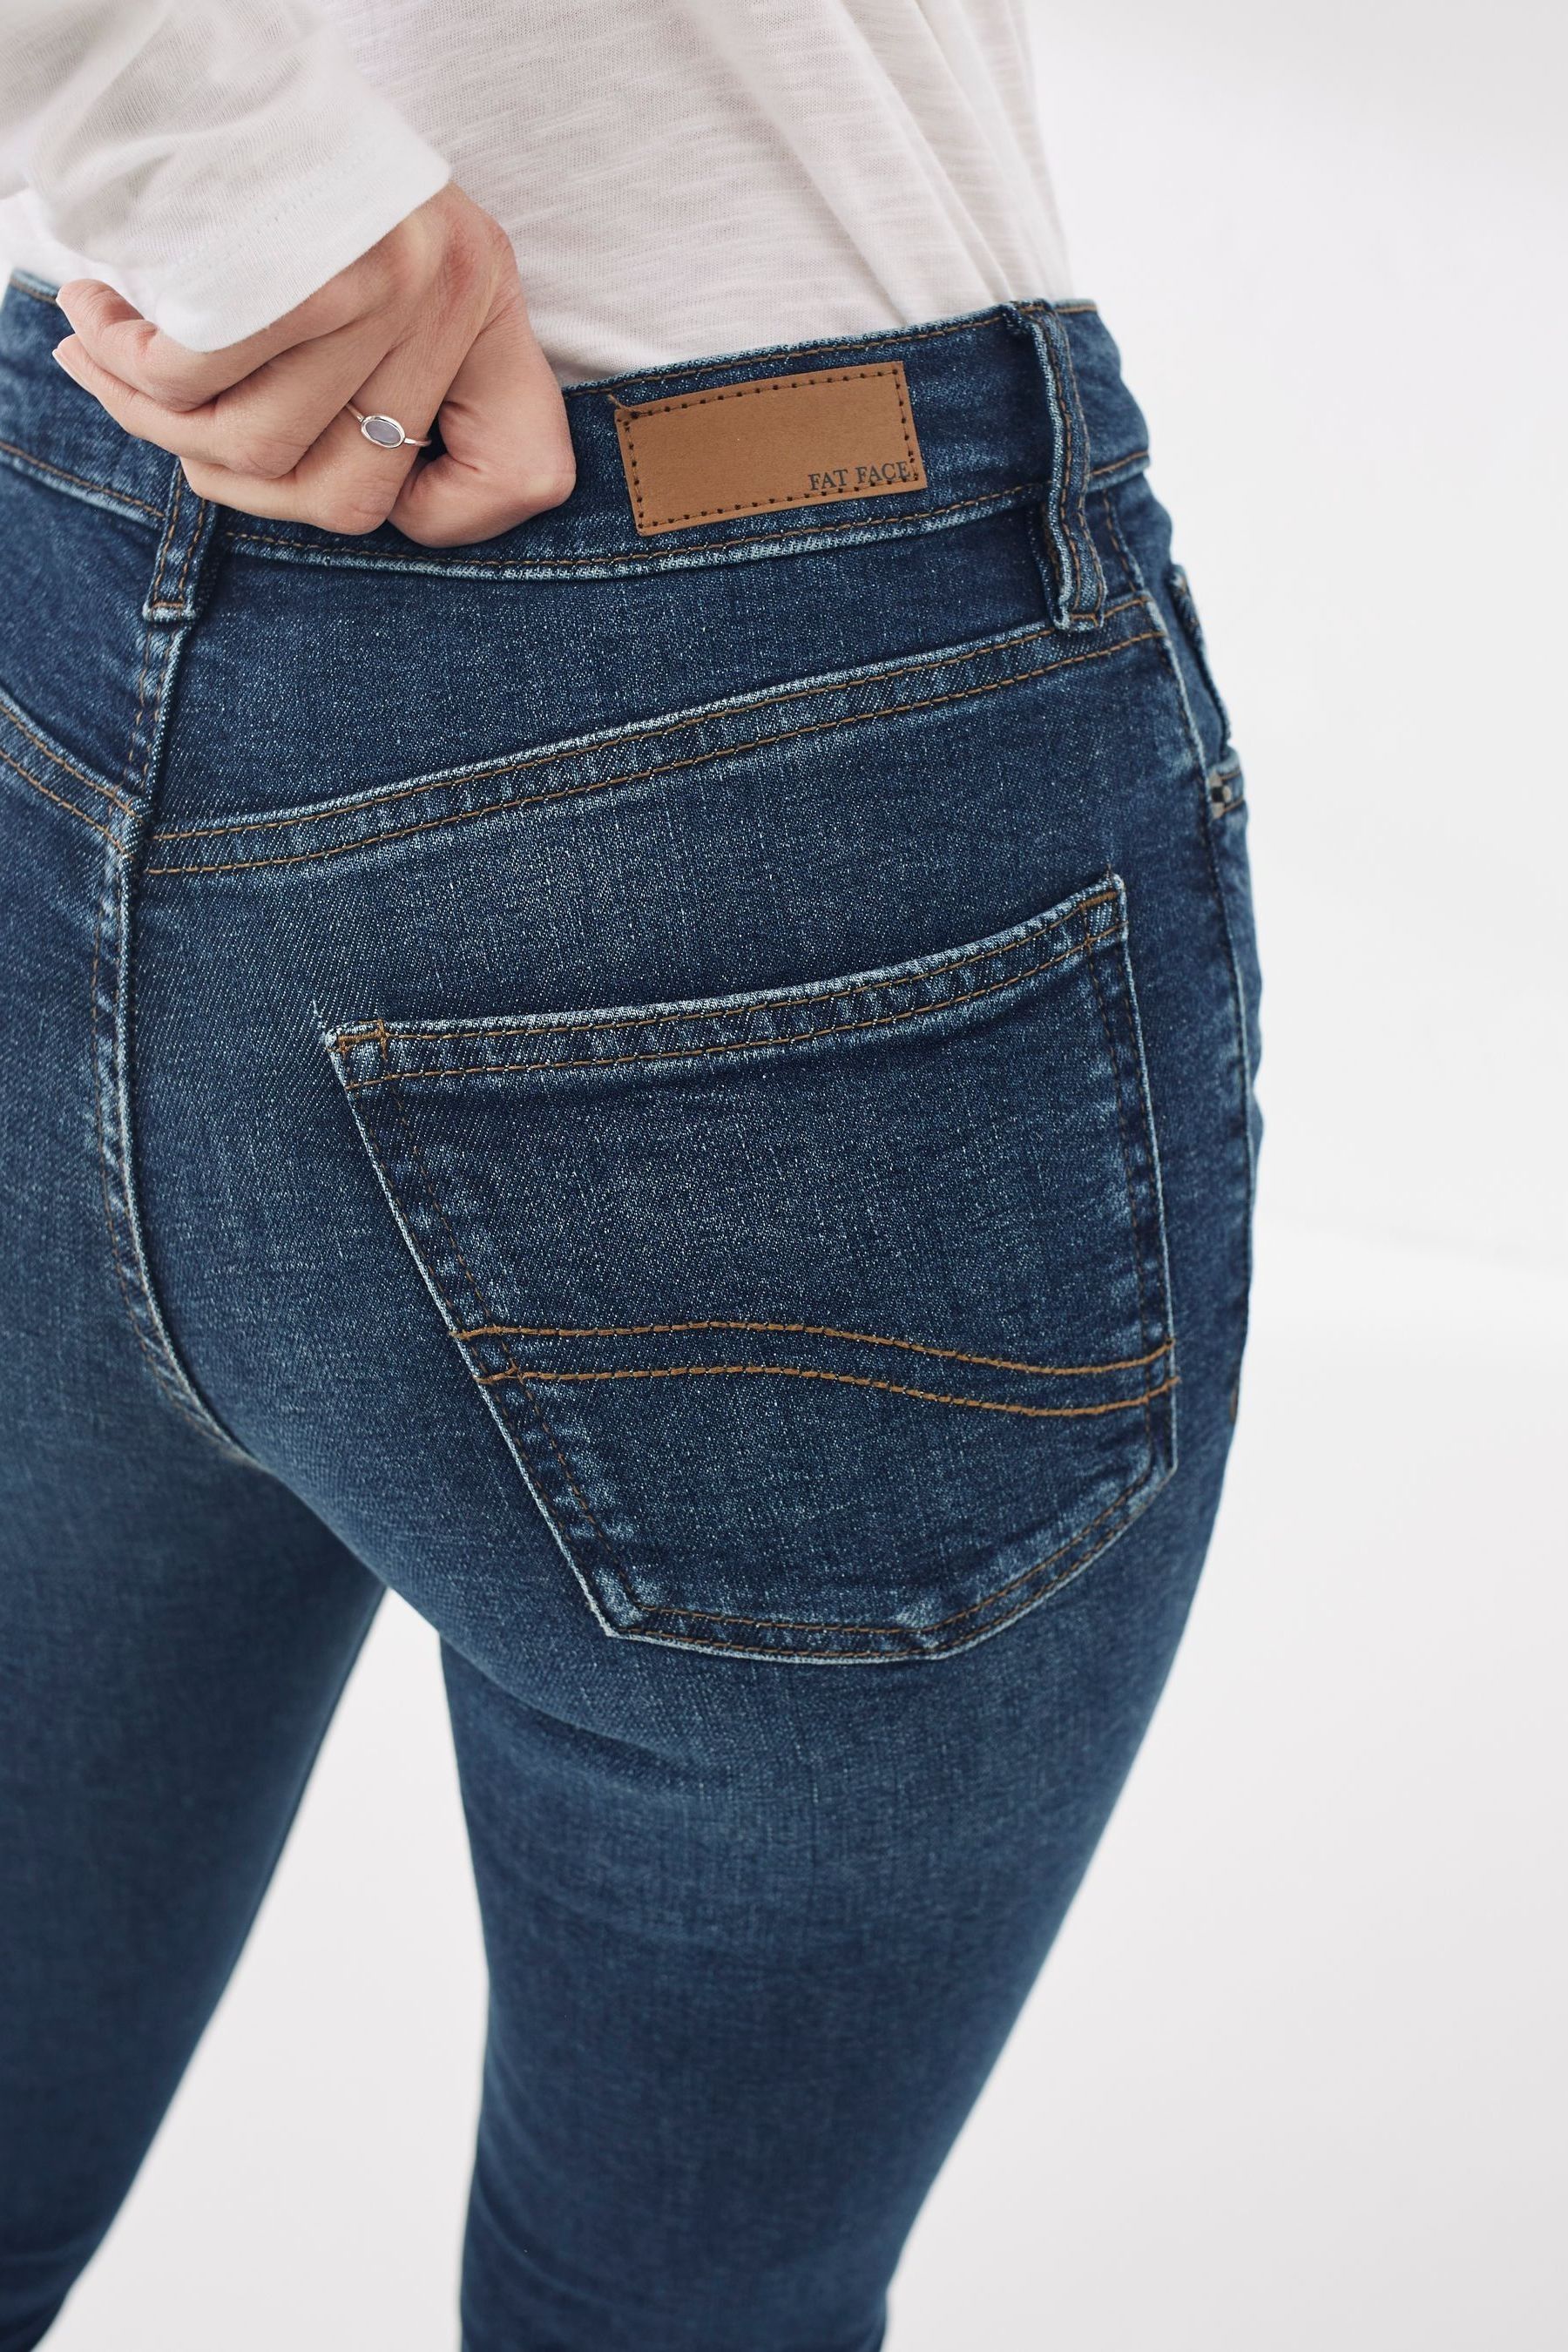 Buy FatFace Blue Sway Slim Jeans from the Next UK online shop